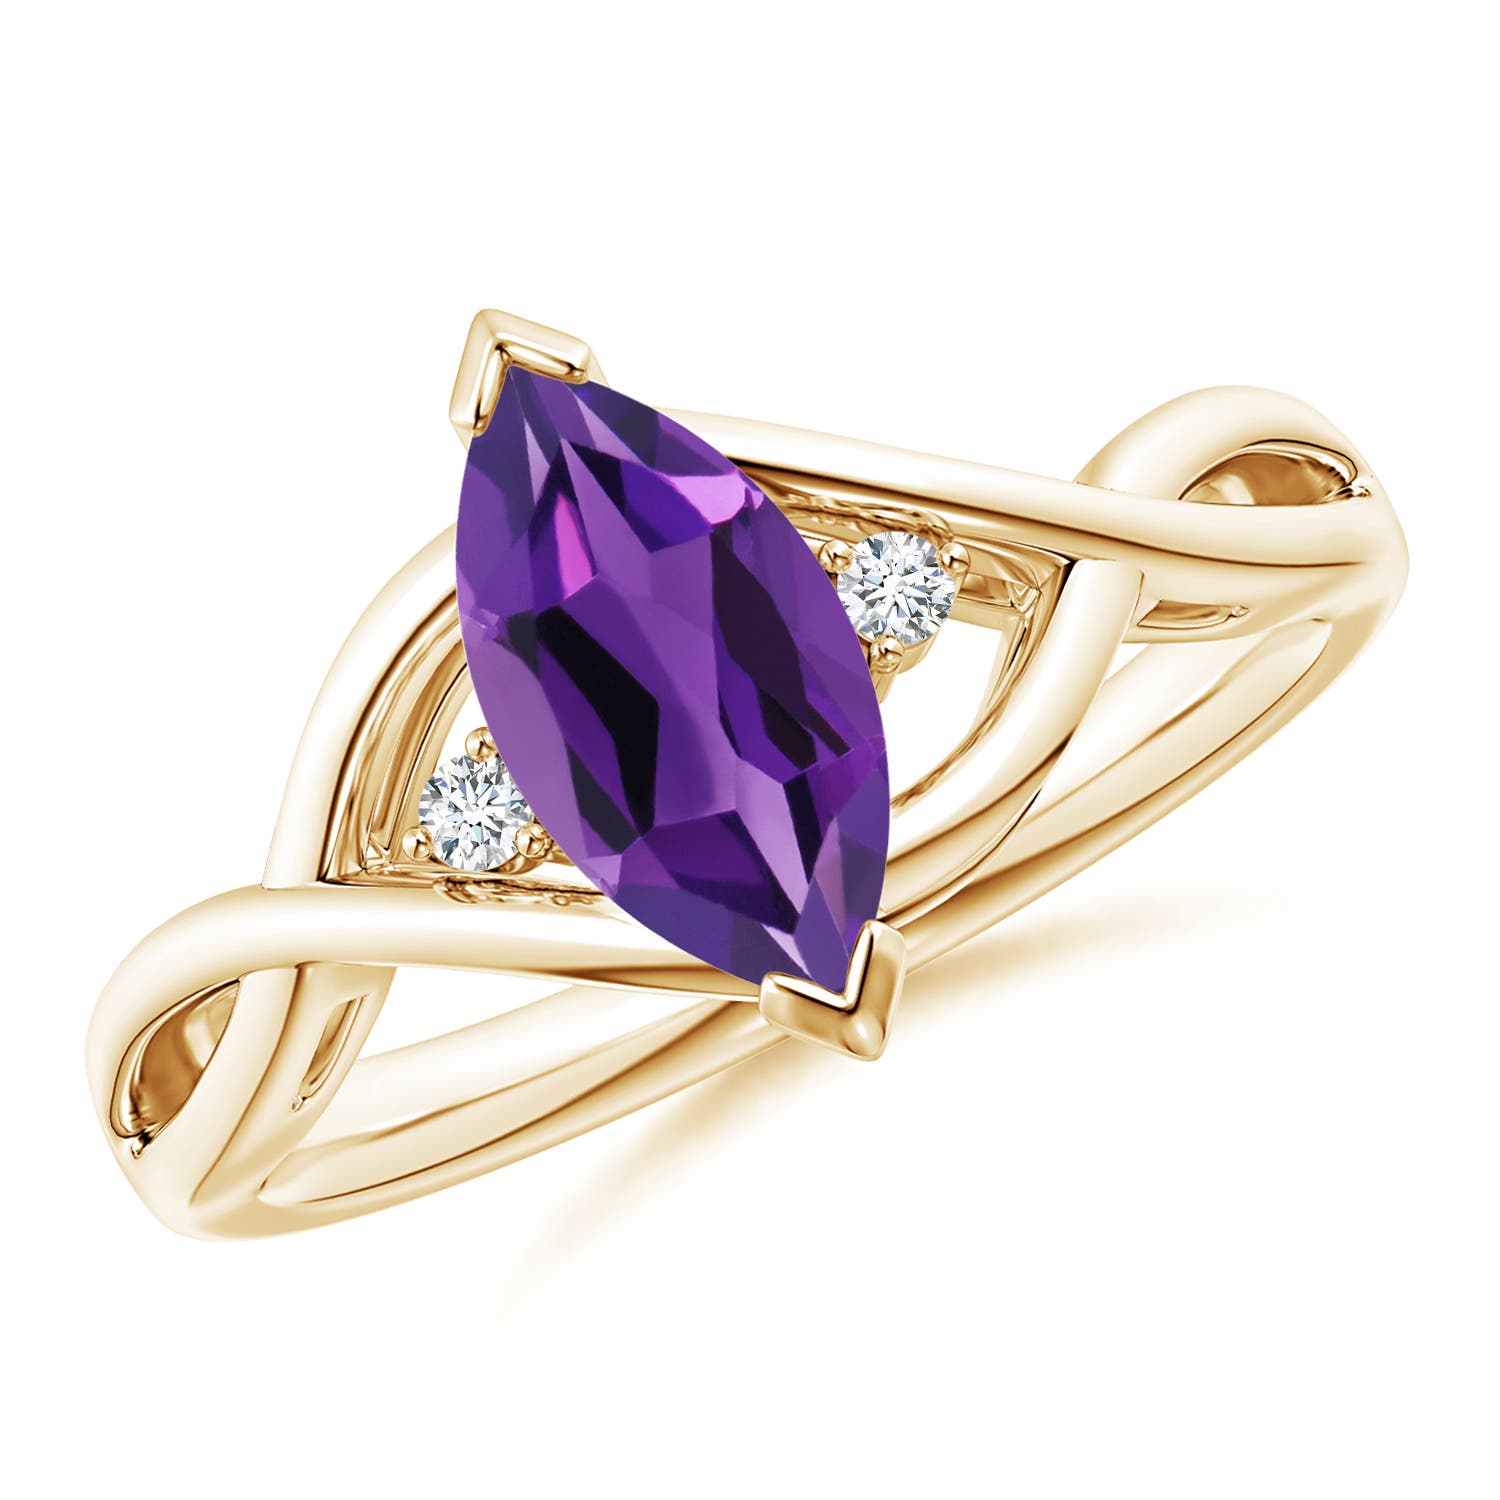 Shop Amethyst Jewelry with Unique Designs | Angara